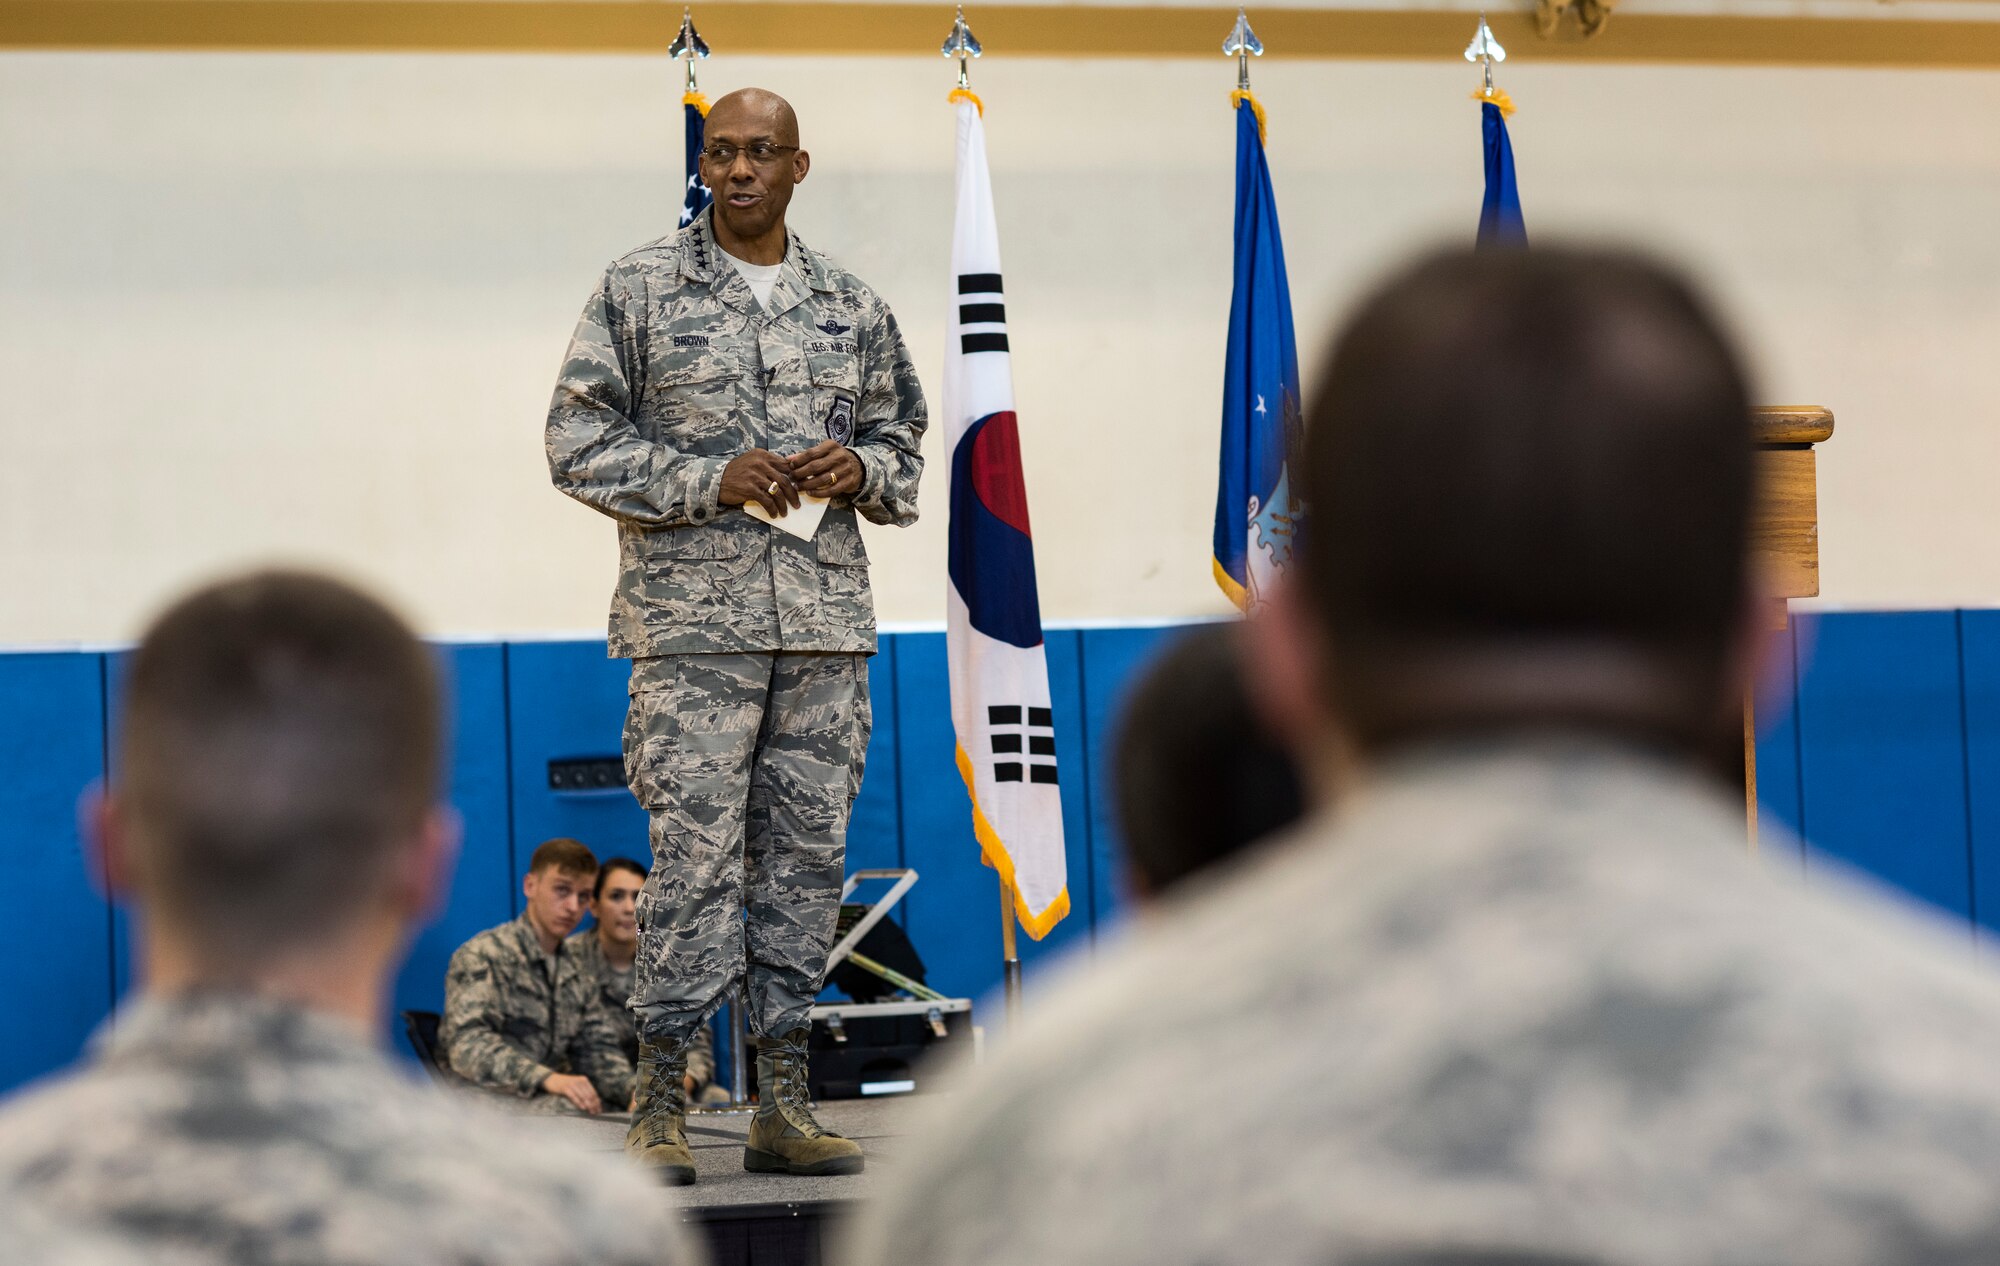 U.S. Air Force Gen. CQ Brown, Jr., Pacific Air Forces commander, briefs 8th Fighter Wing “Wolf Pack” Airmen during an all-call at Kunsan Air Base (AB), Republic of Korea, Aug. 29, 2018. Brown had the opportunity to talk directly to 8th Fighter Wing Airmen about his priorities for the Indo-Pacific region and to relate personal experiences from his time as a previous pilot and wing commander at Kunsan AB. (U.S. Air Force photo by Senior Airman Stefan Alvarez)